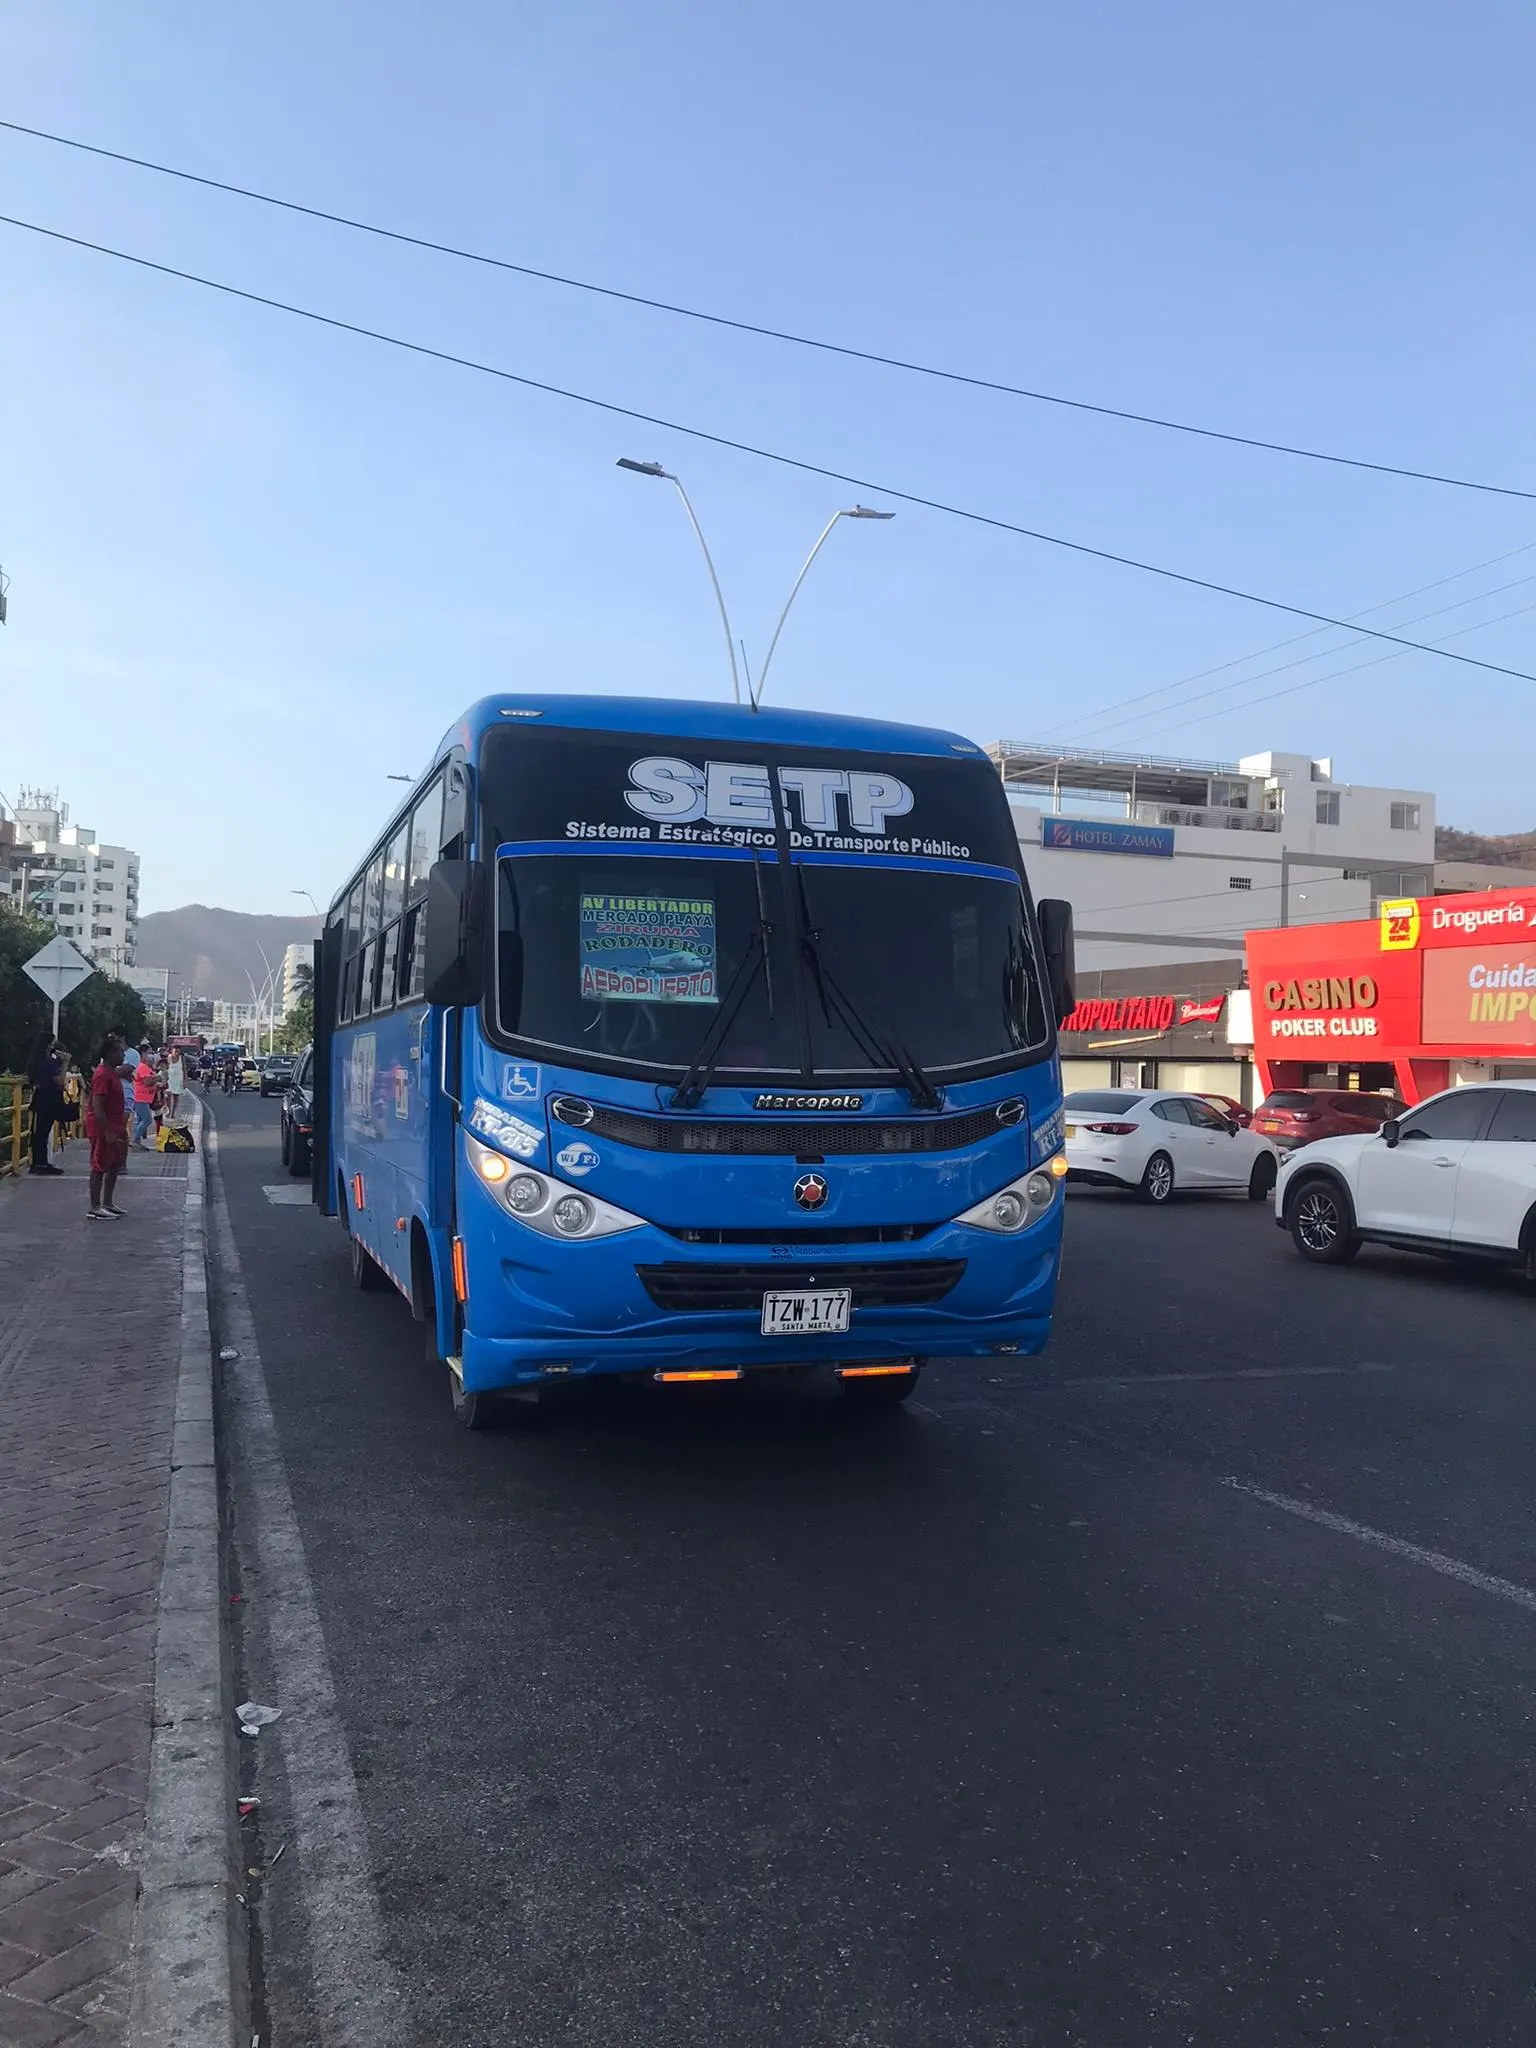 How To Get From Santa Marta Airport To El Rodadero - All Possible Ways, cheapest way from Santa Marta airport to El Rodadero, Santa Marta airport to El Rodadero, bus Santa Marta airport to El Rodadero, taxi Santa Marta airport to El Rodadero, EL RODADERO